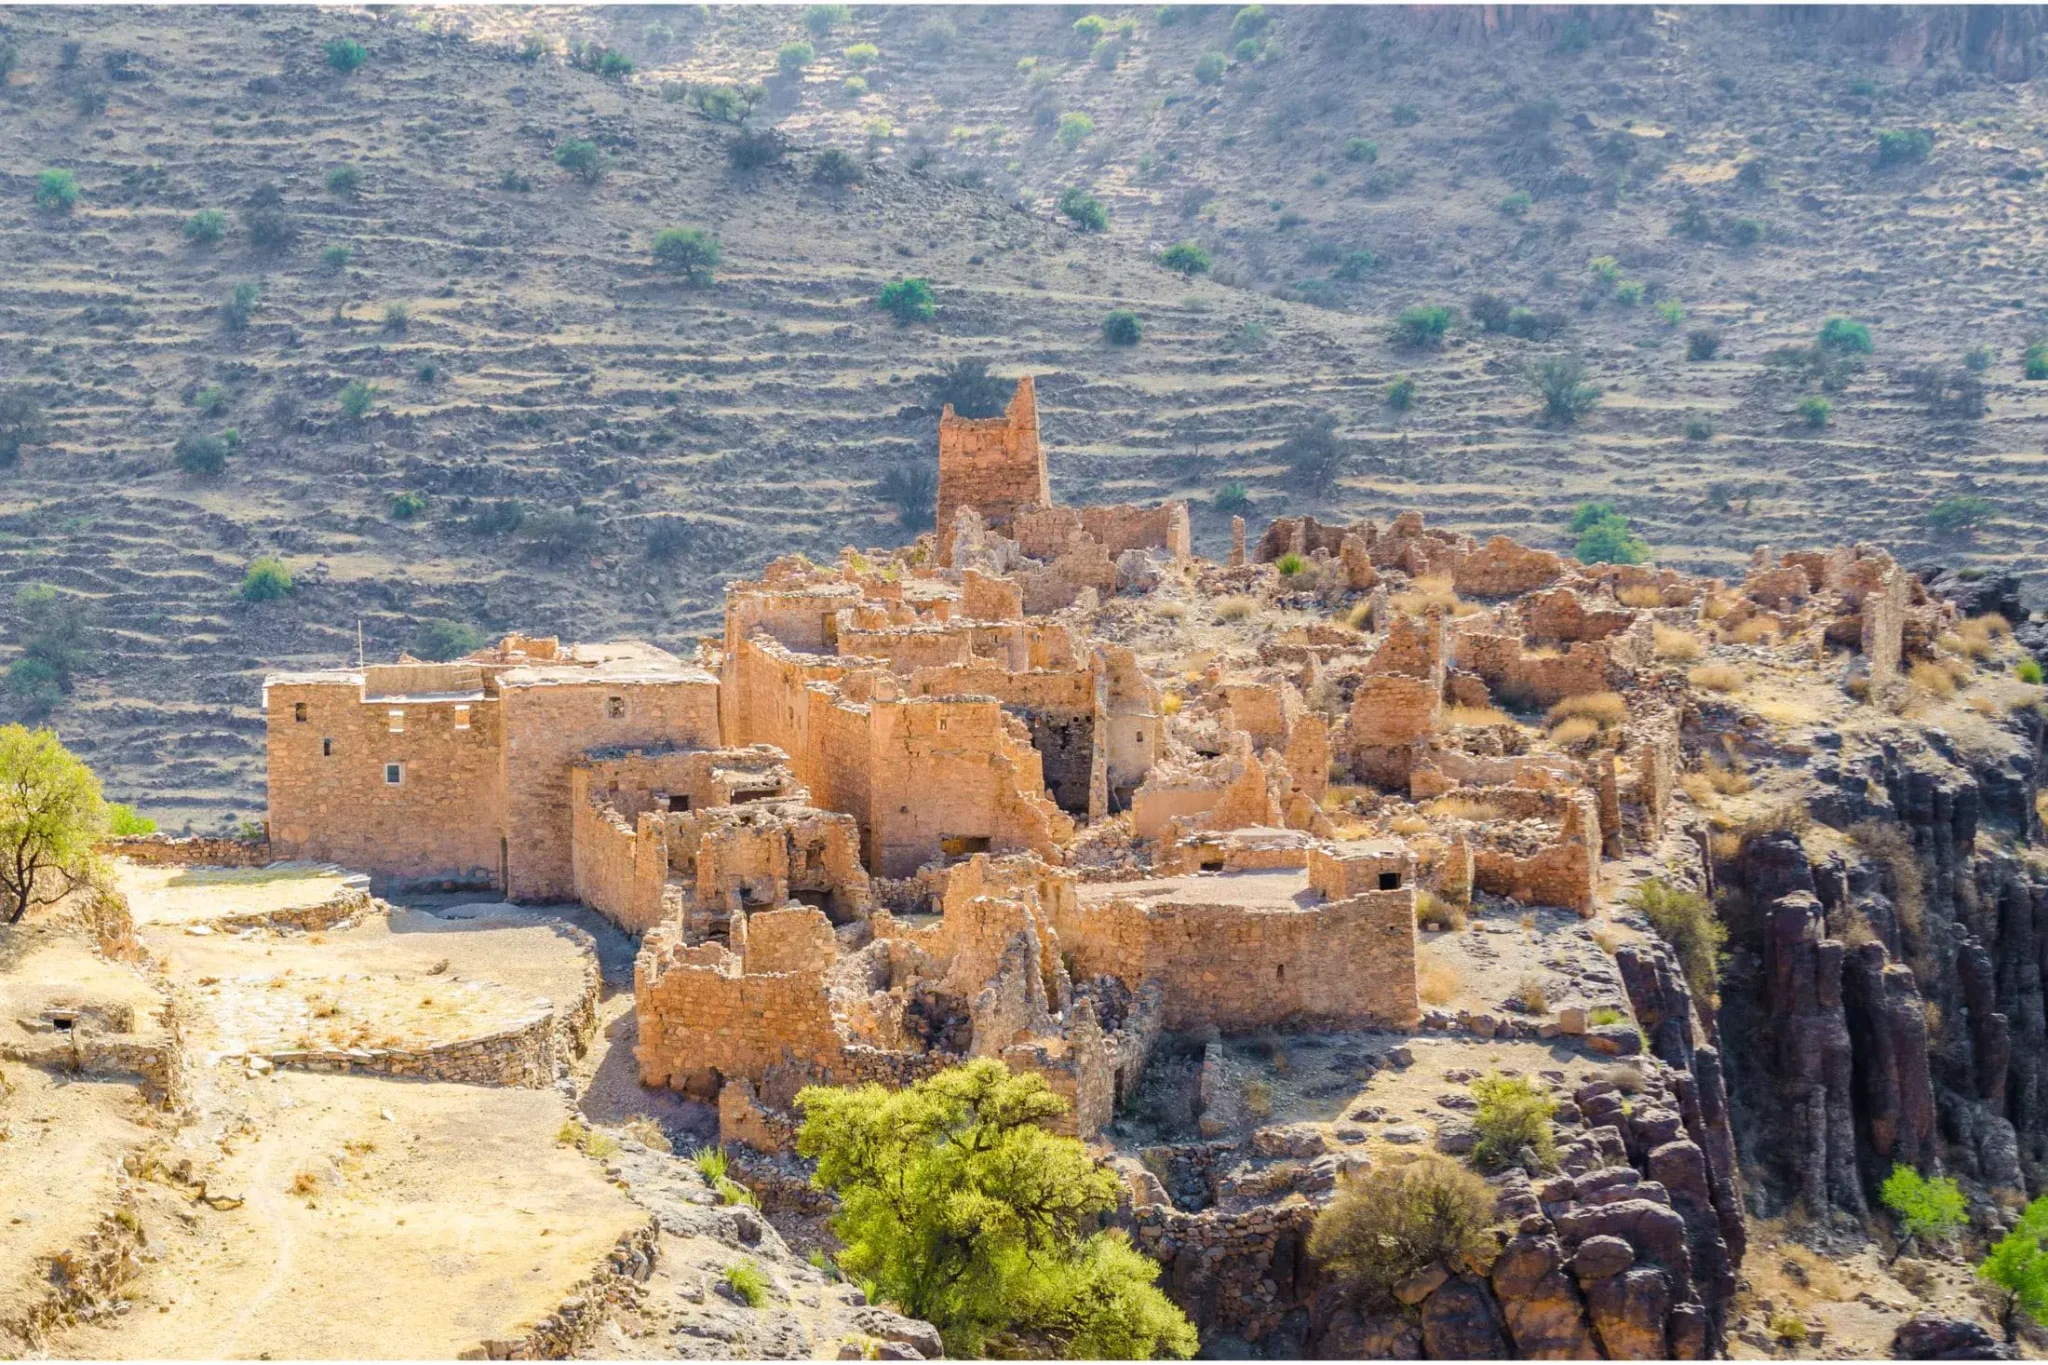 Old settlement in the Anti-Atlas Mountains in Morocco